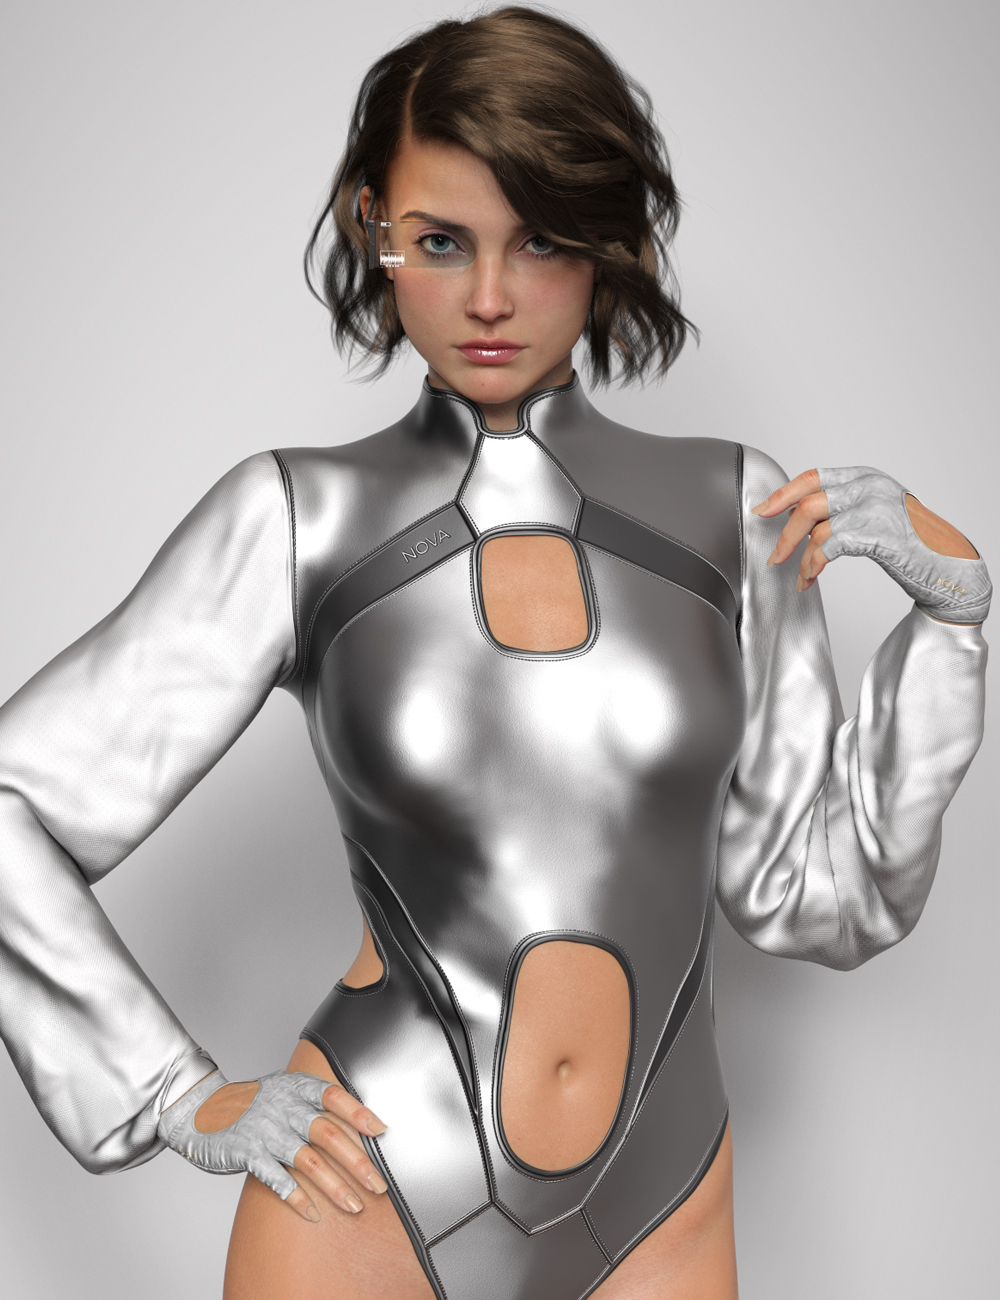 dForce CGI Nova Outfit for Genesis 9 and Genesis 8, 8.1 Females by: Color Galeria, 3D Models by Daz 3D